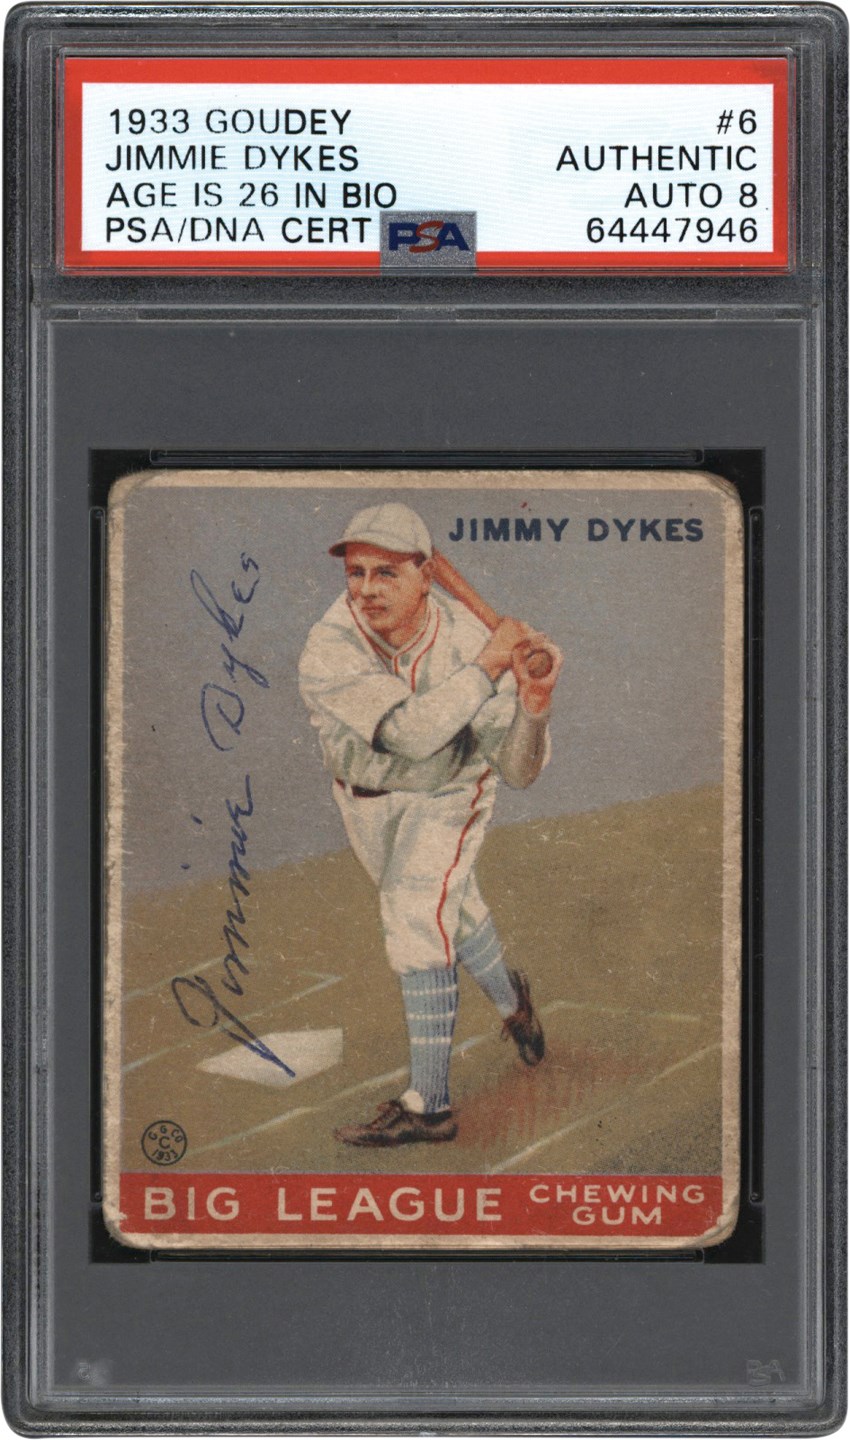 - Signed 1933 Goudey #6 Jimmie Dykes "Age is 26 in Bio"  PSA  Authentic Auto 8